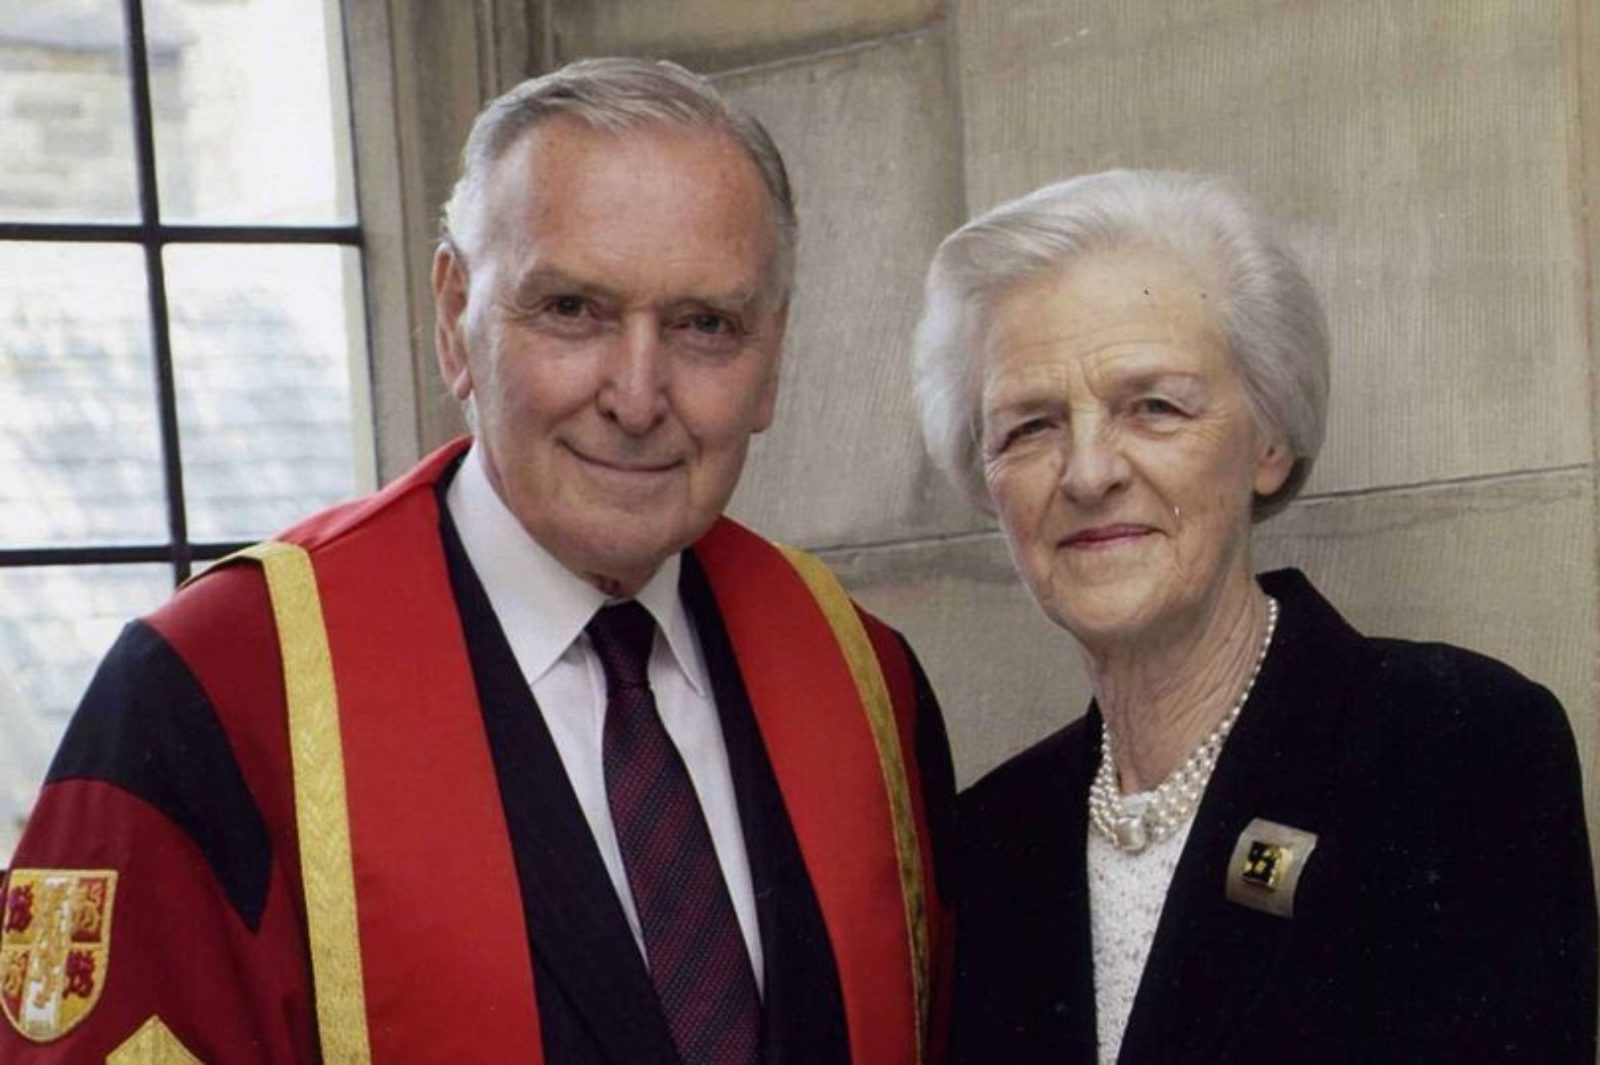 Lord Barry Jones with his wife Lady Janet